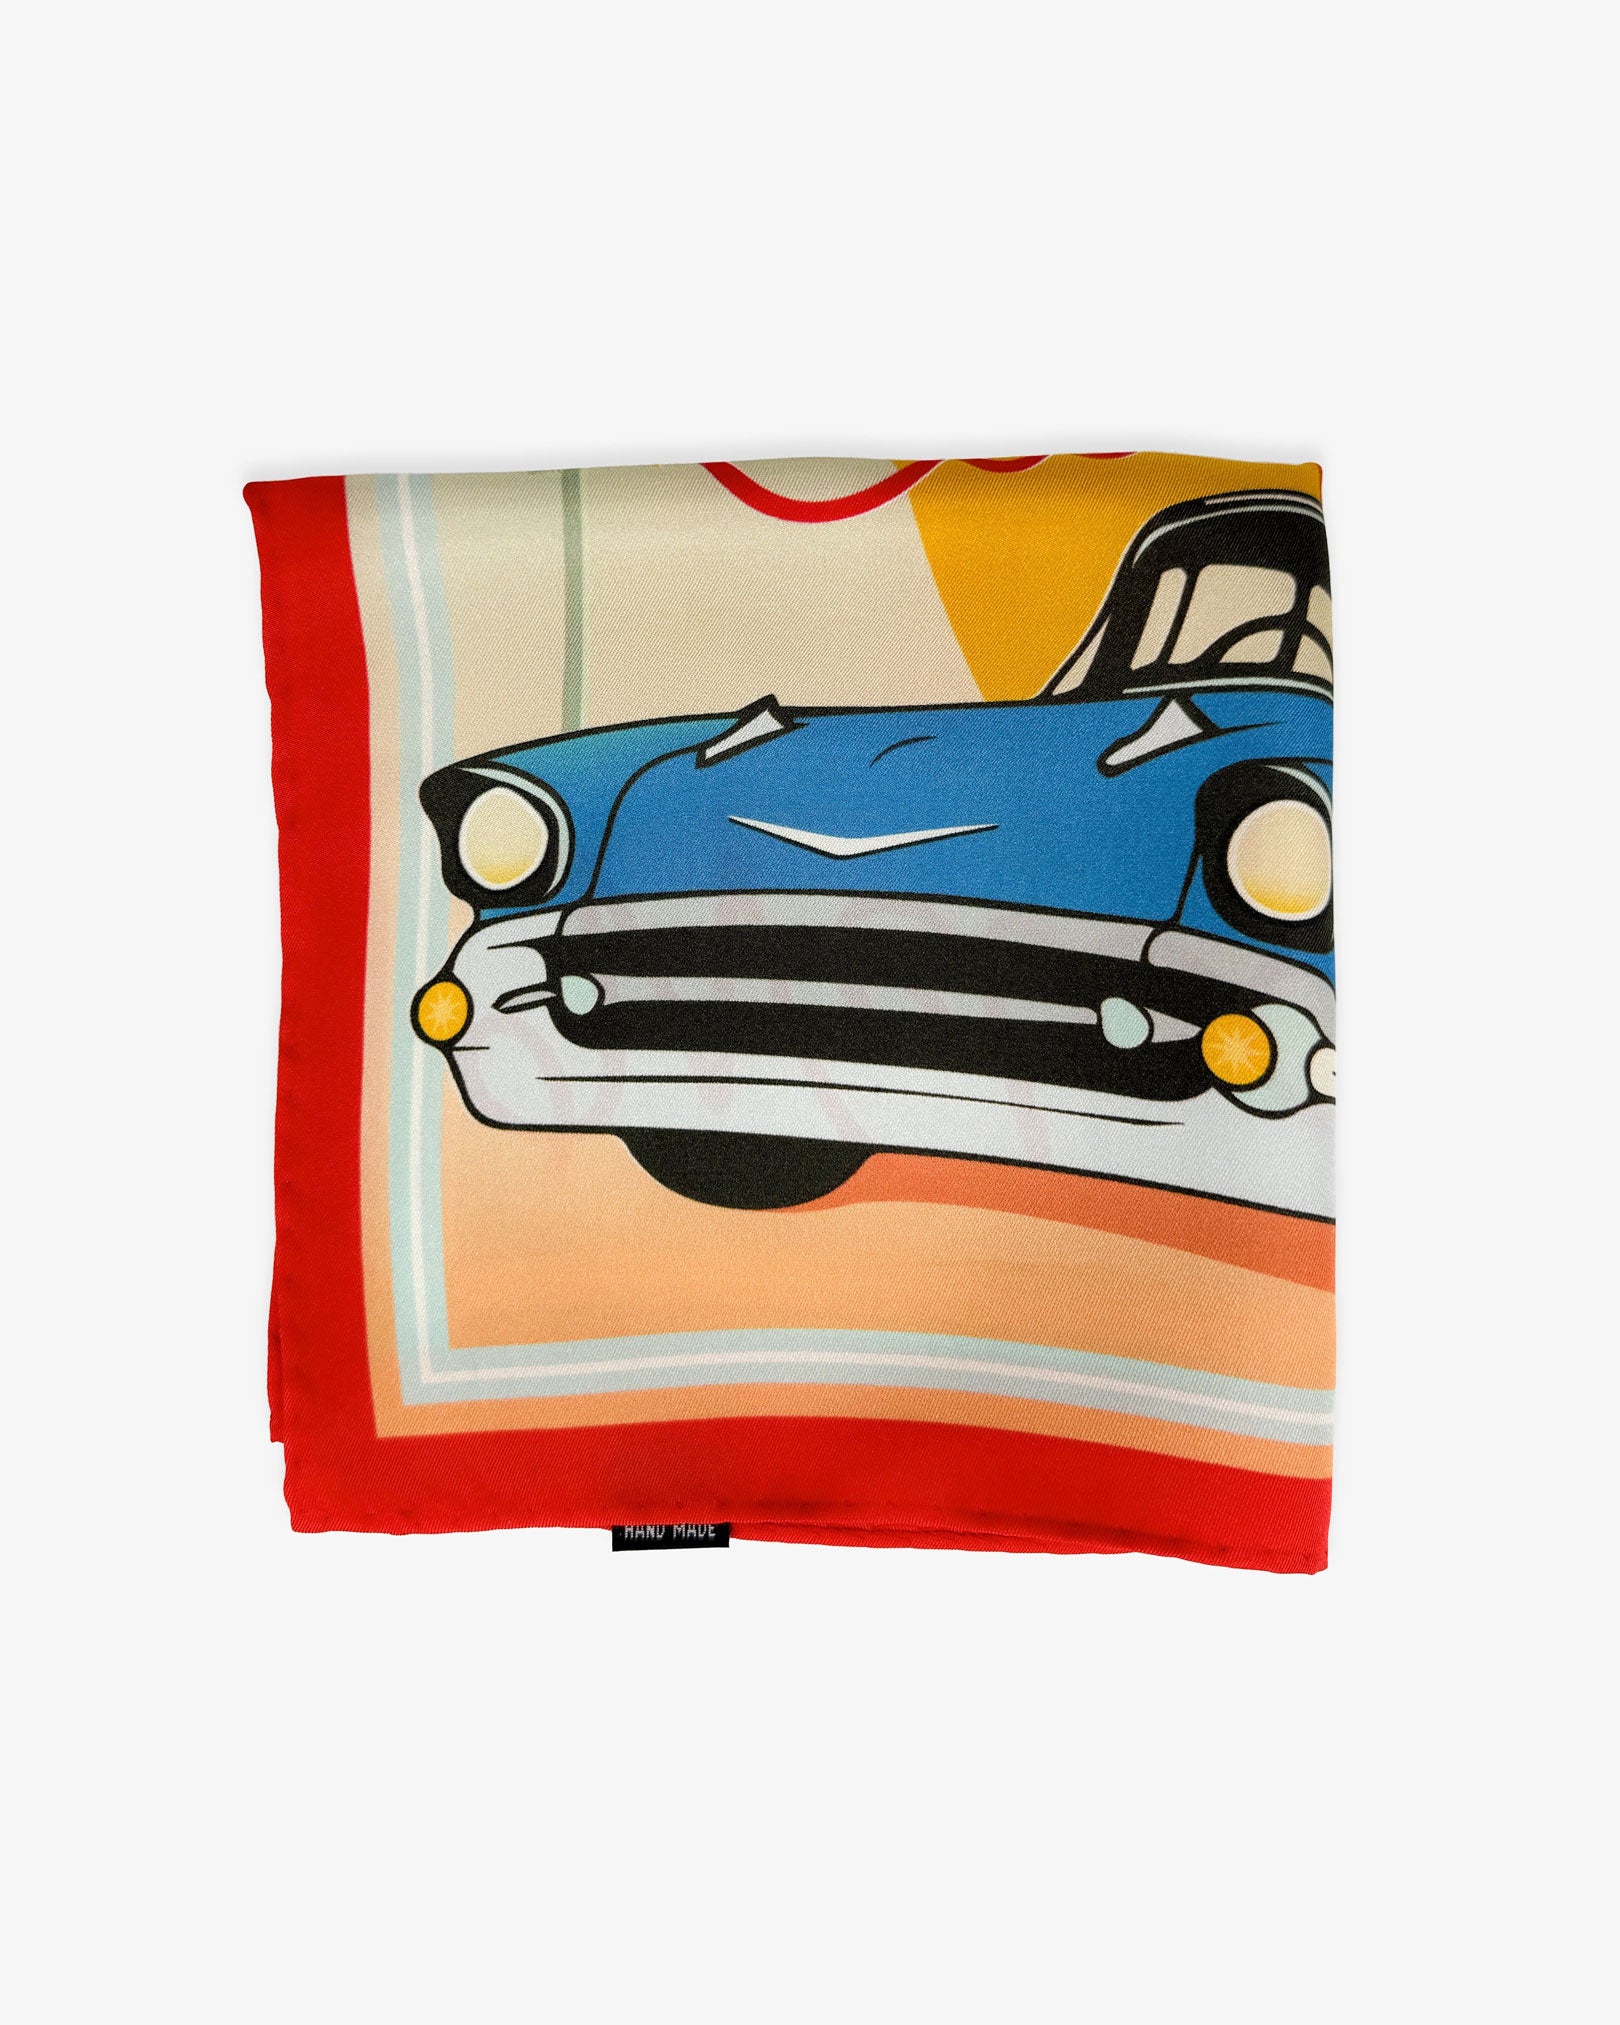 The 'Sunset Ride' blue silk pocket square from SOHO Scarves folded into a quarter, showing a portion of the blue Cadillac and red border.